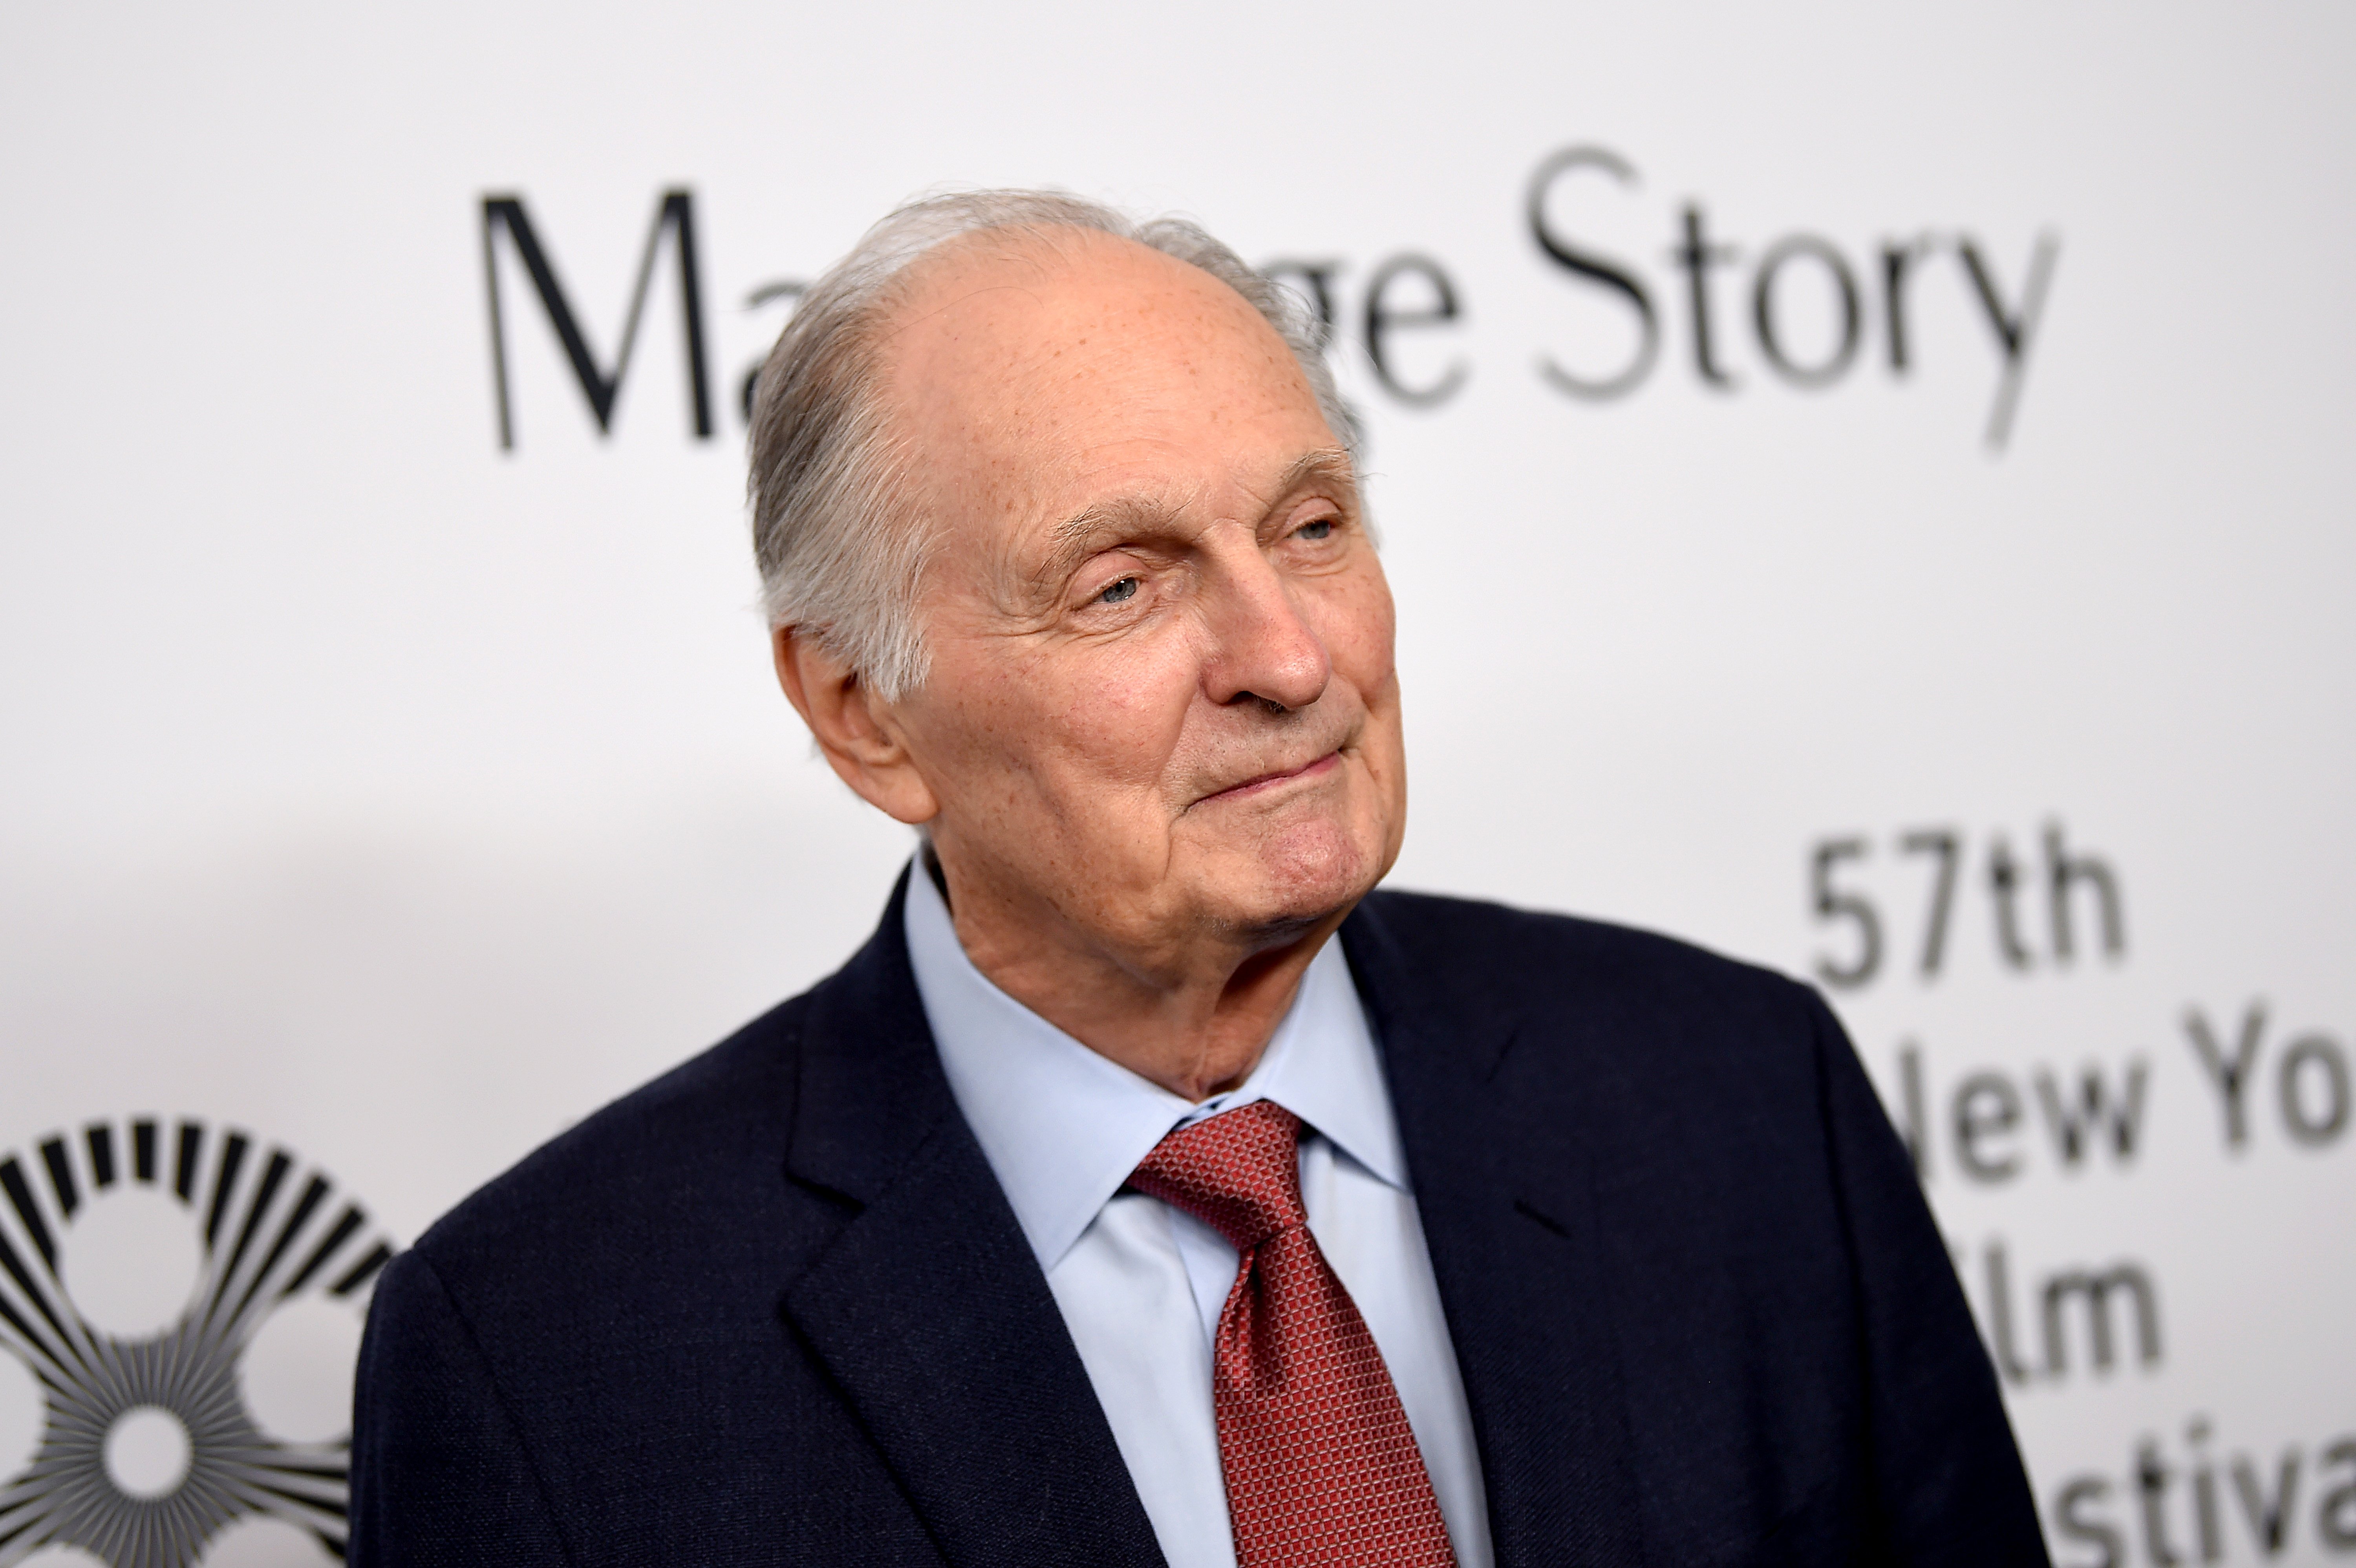 Alan Alda attends the "Marriage Story" premiere at 57th New York Film Festival on October 4, 2019 in New York City | Source: Getty Images